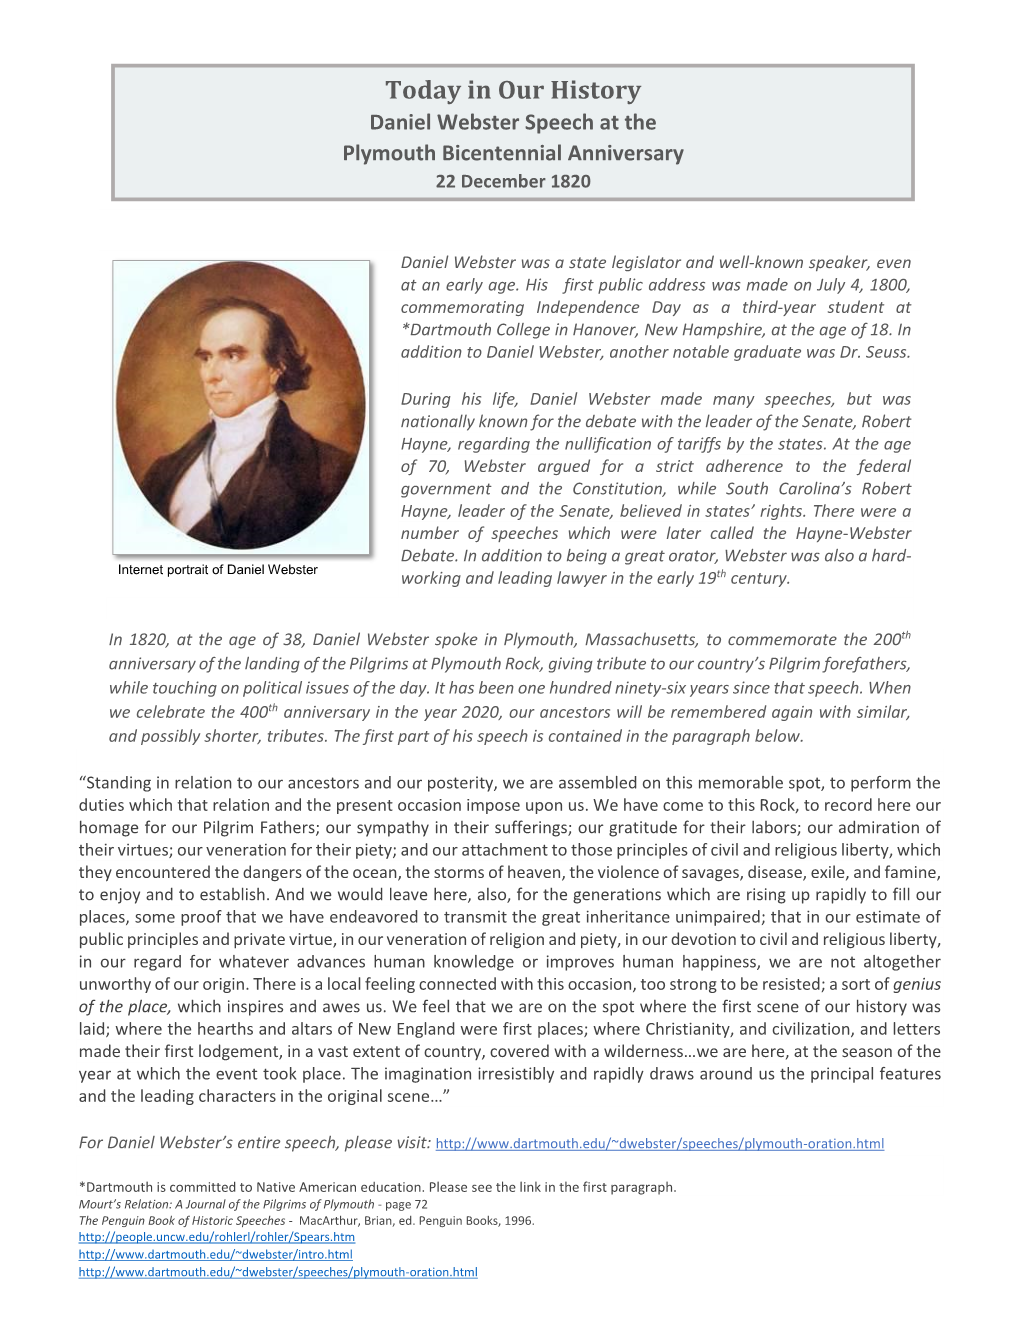 Today in Our History Daniel Webster Speech at the Plymouth Bicentennial Anniversary 22 December 1820